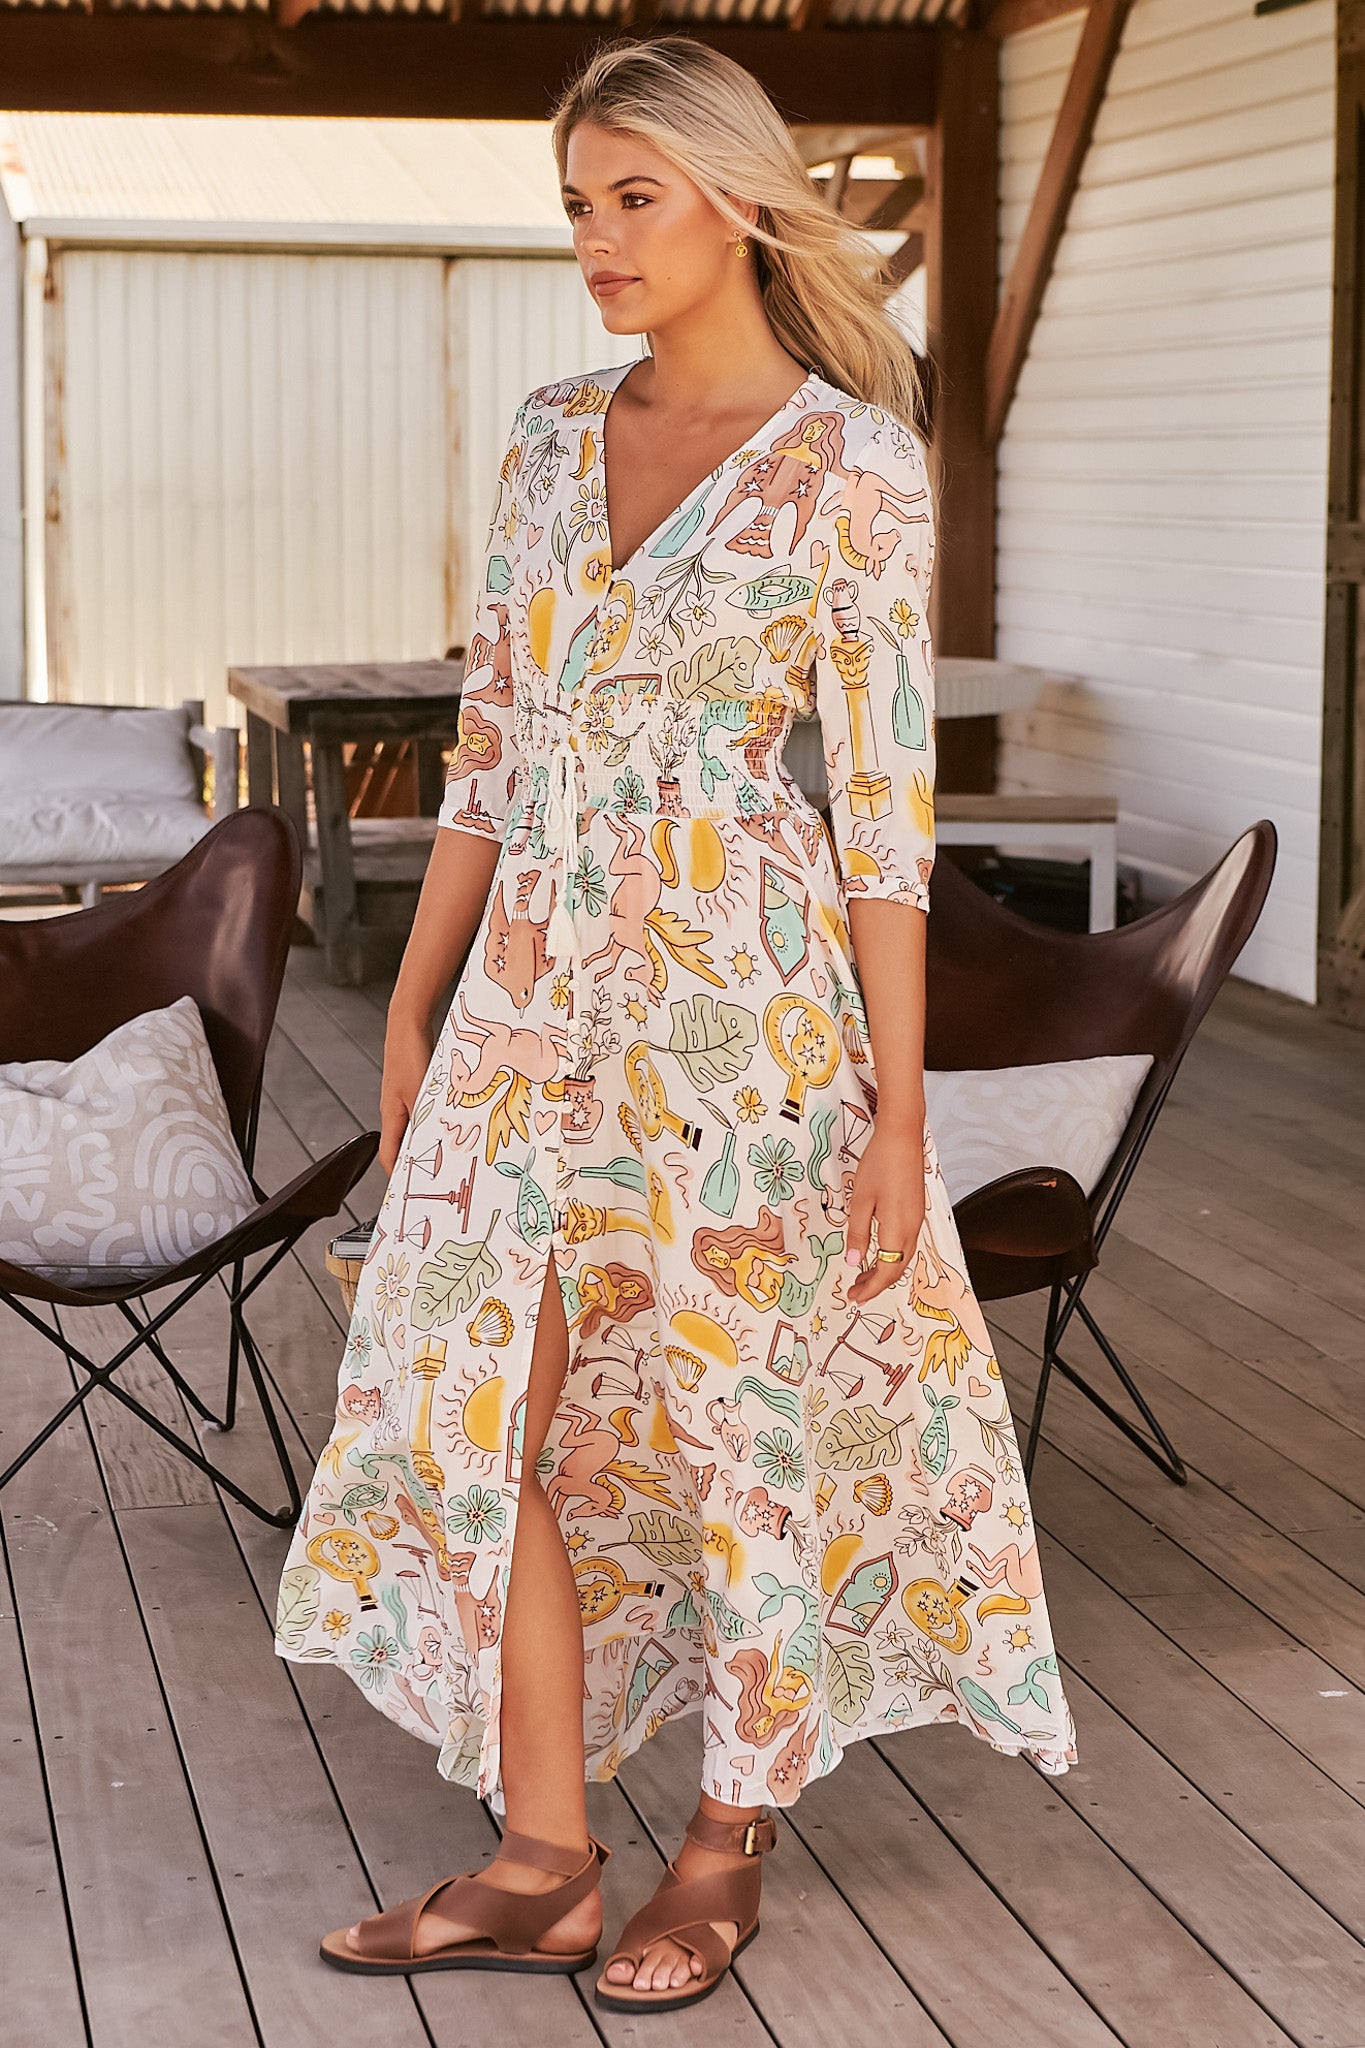 JAASE - Indiana Maxi Dress: Lace Back Shirred Waist A Line Dress with Handkercheif Hemline in Fantasy Print